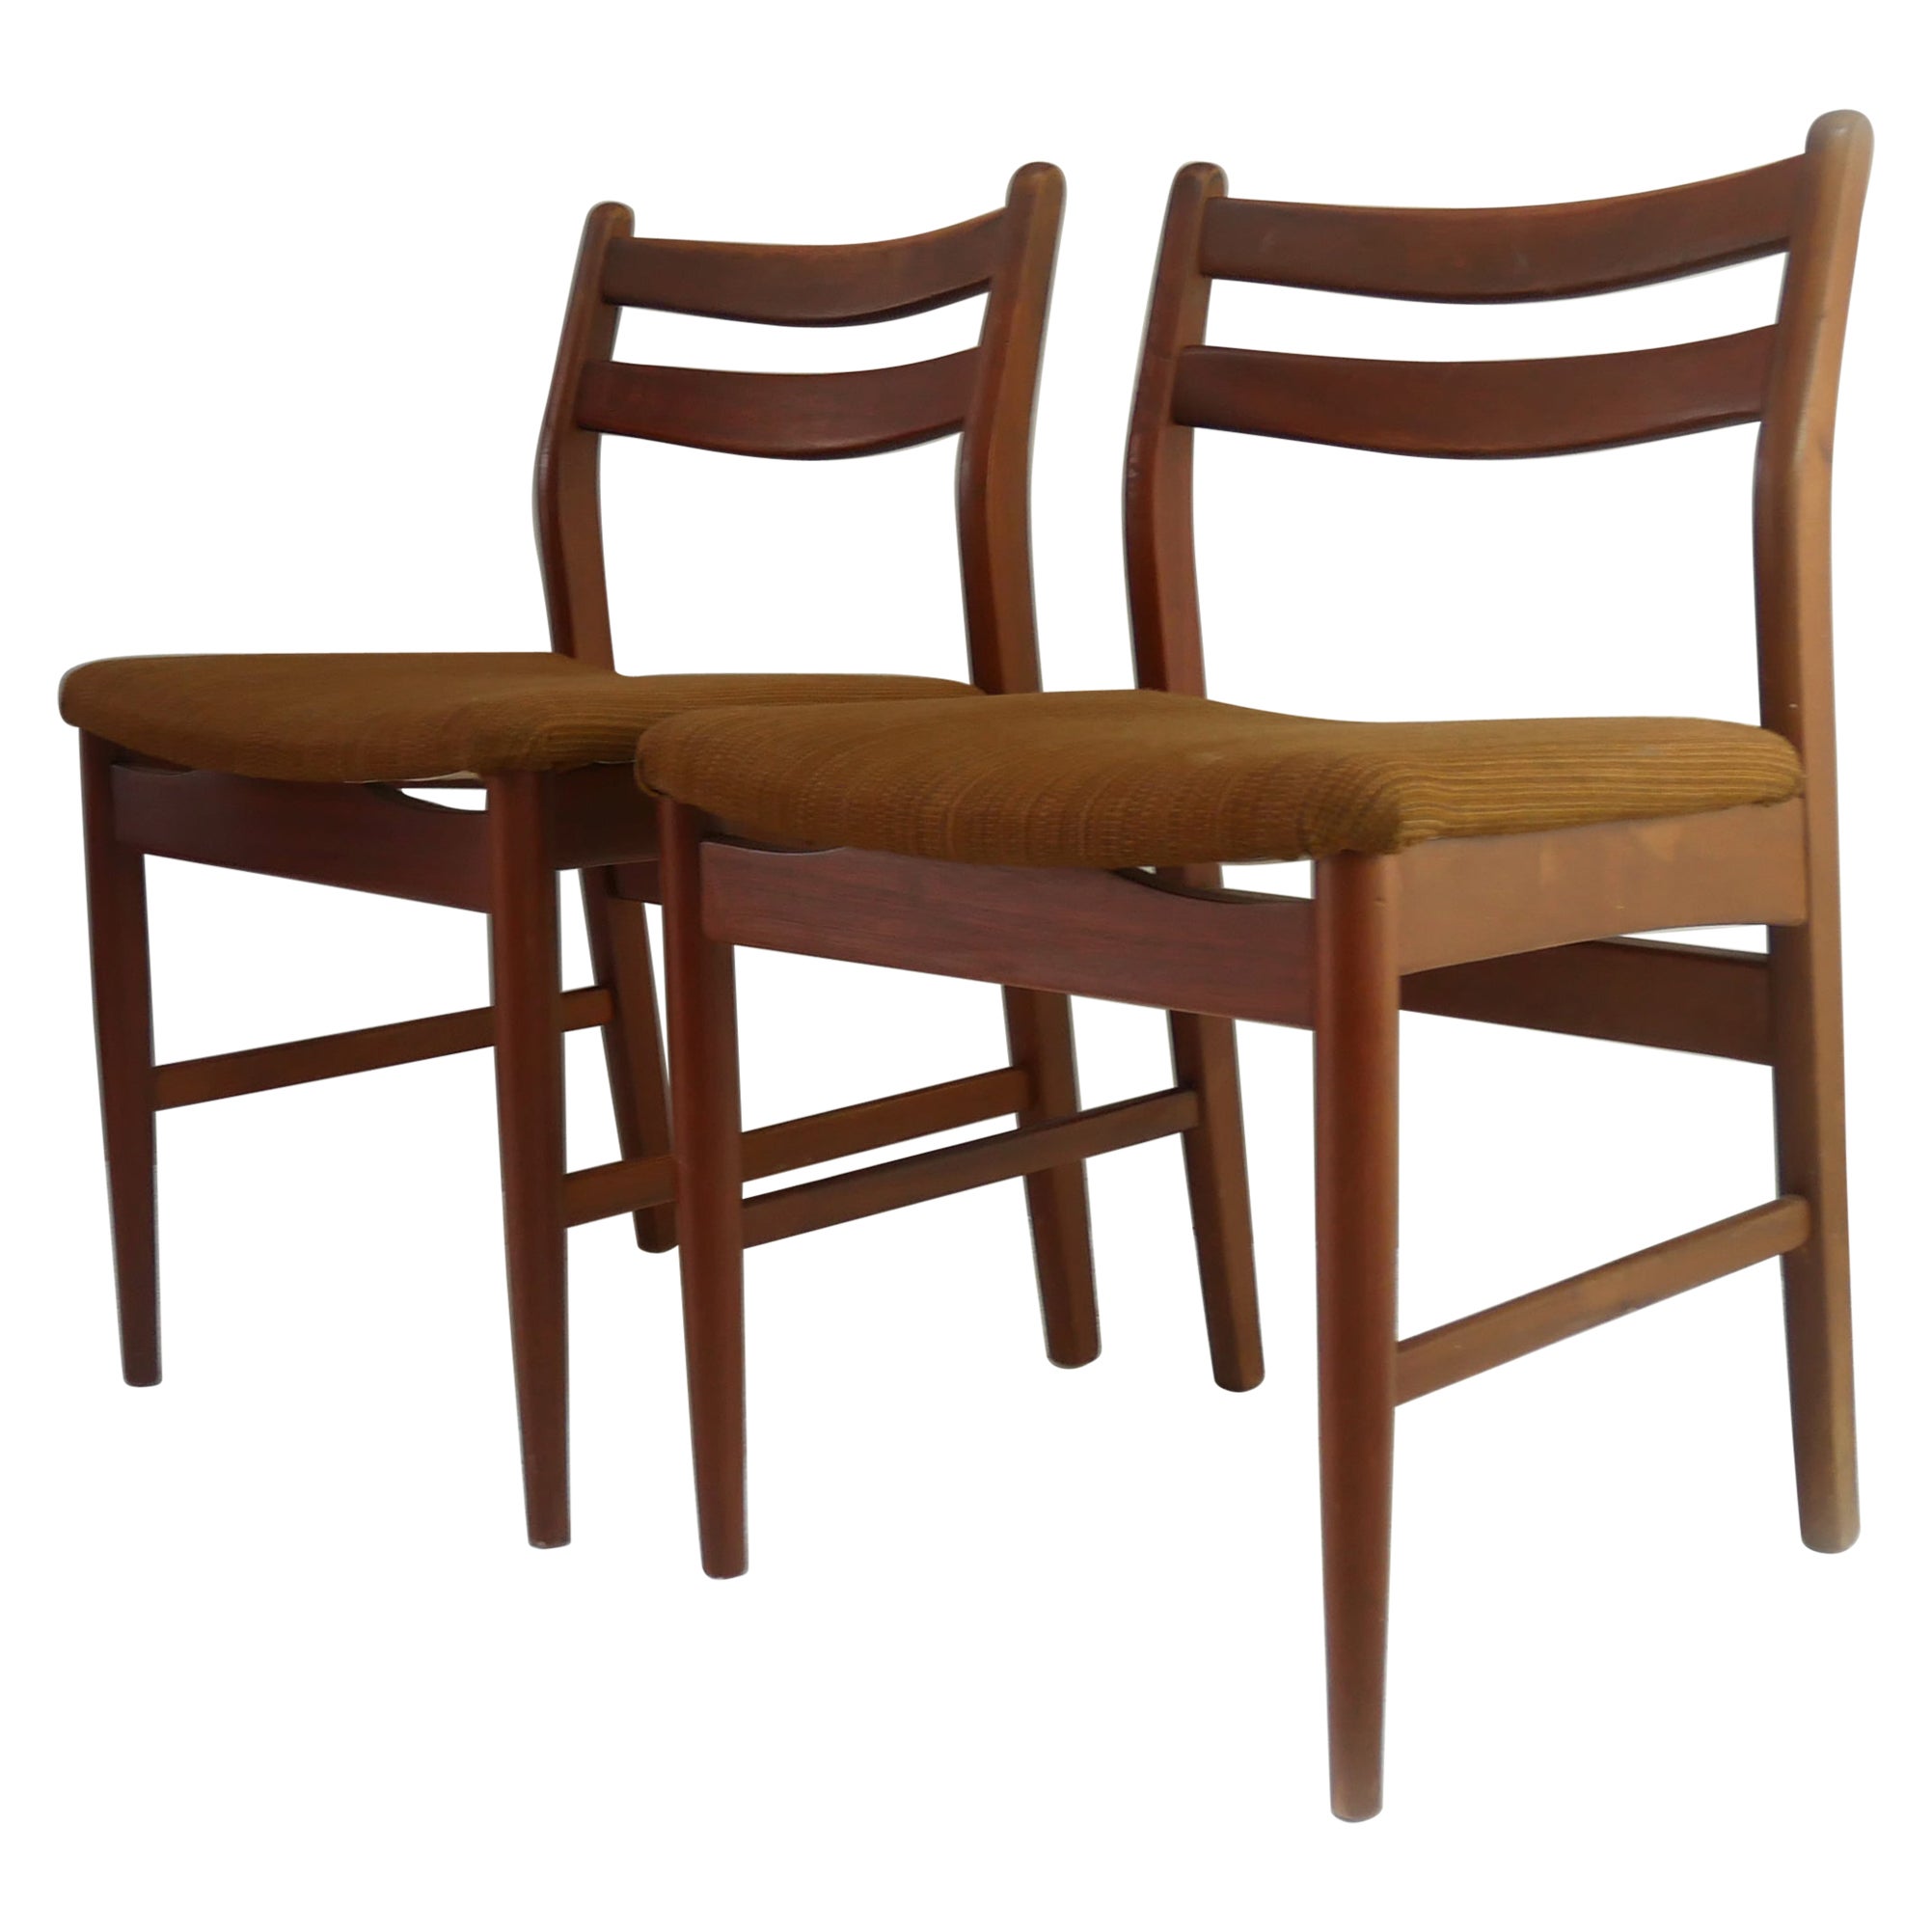 Two 1960’s Mid Century Danish Dining Chairs 'Price for 1 Chair'